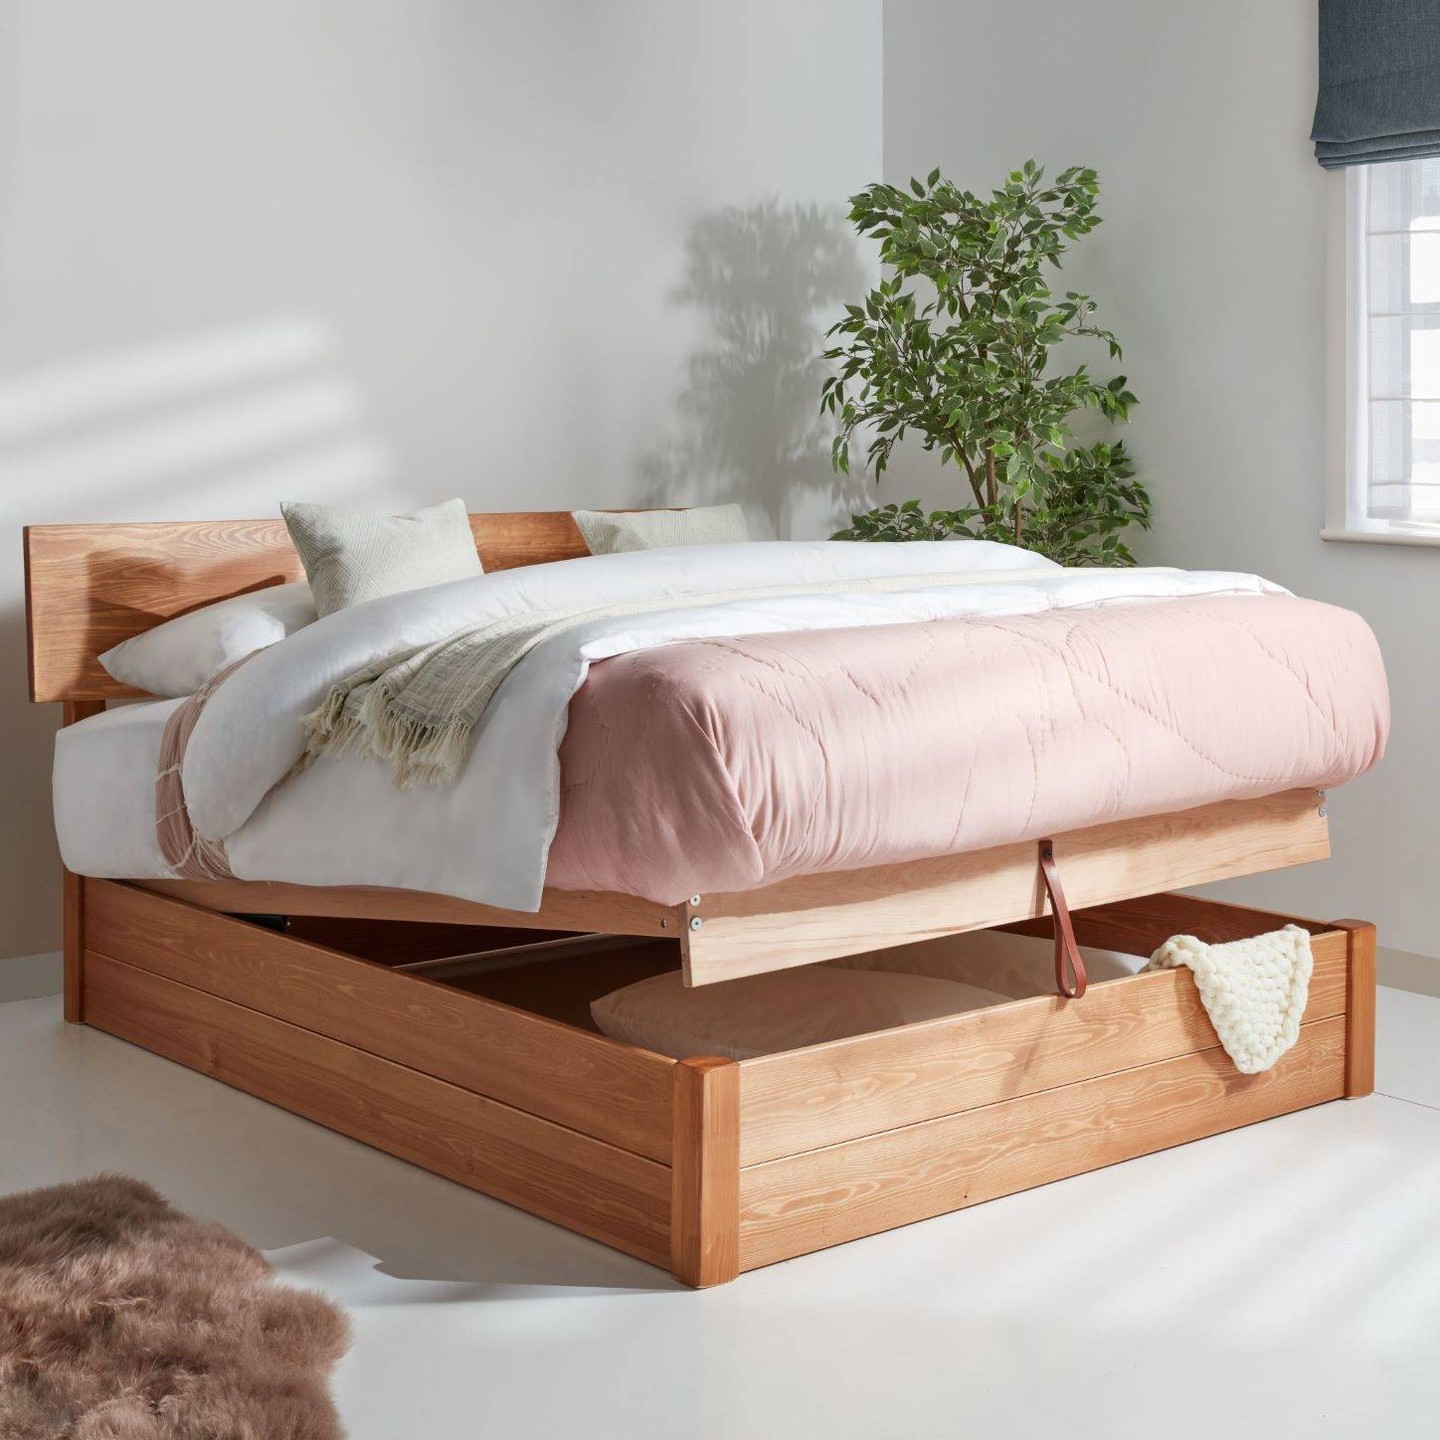 a bed with storage underneath provides clever storage solutions for a more efficient home.